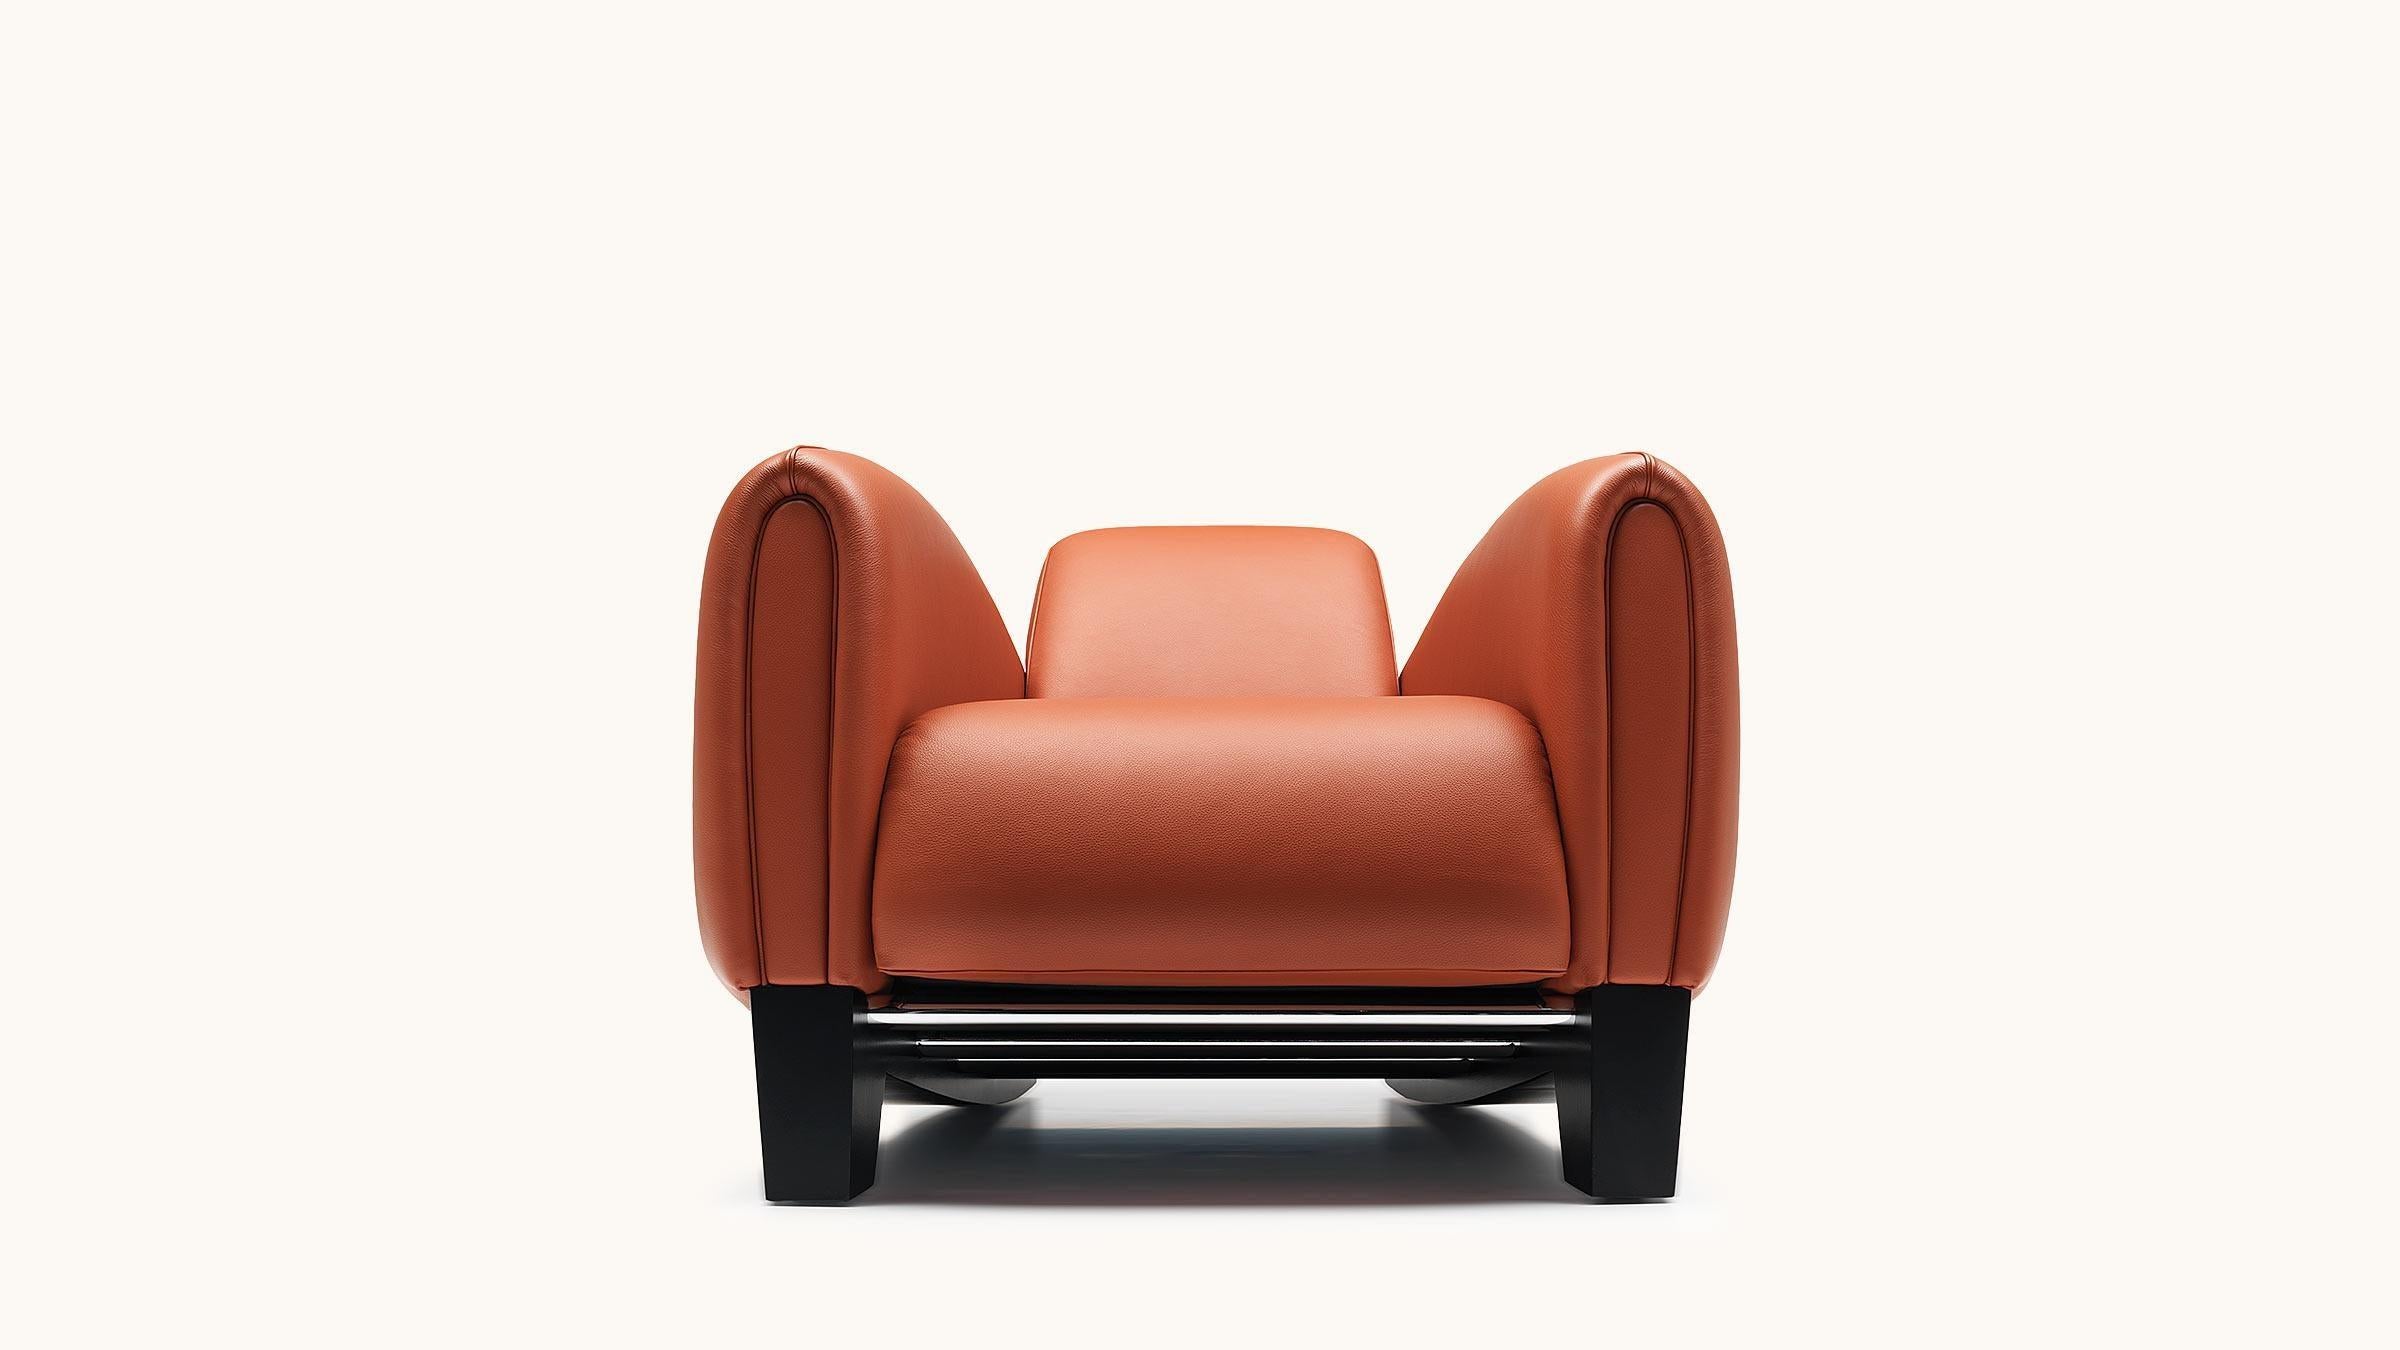 The Bugatti Type 57, an icon of Art Deco design, inspired Franz Romero when he designed the DS-57 armchair for De Sede. The designer not only managed to incorporate the characteristic seating comfort of Bugatti car seats; he also accomplished a